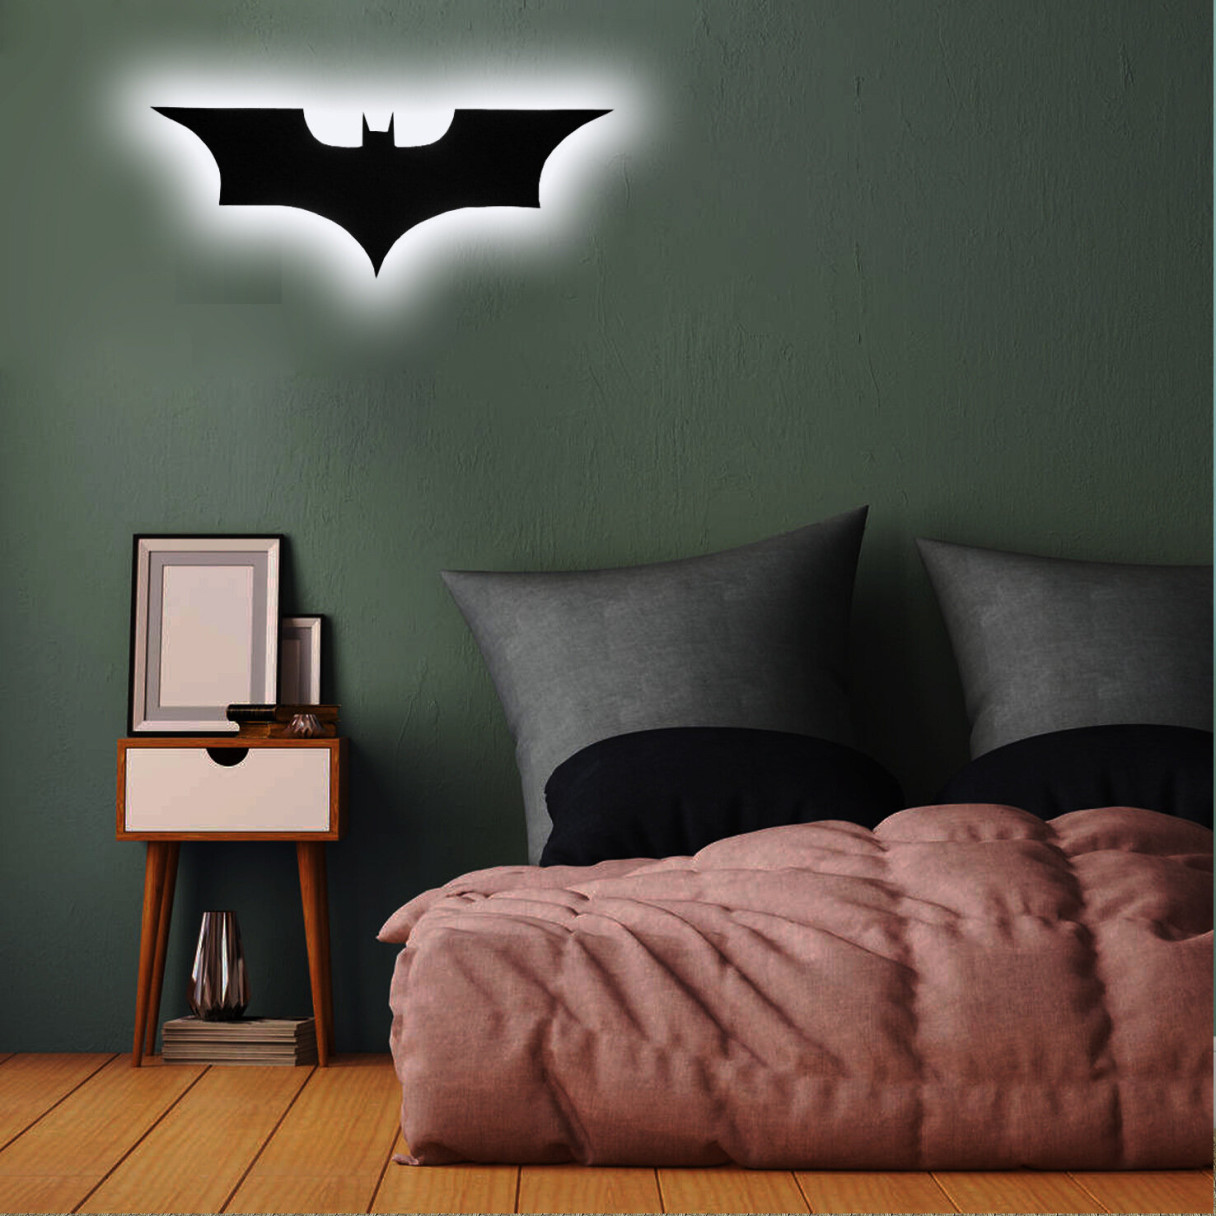 30cm/ 40cm Cool LED Wall Light with Wireless Remote Control and Color Change Bat Wings Shape Bedside Light Atmosphere Logo Lamp